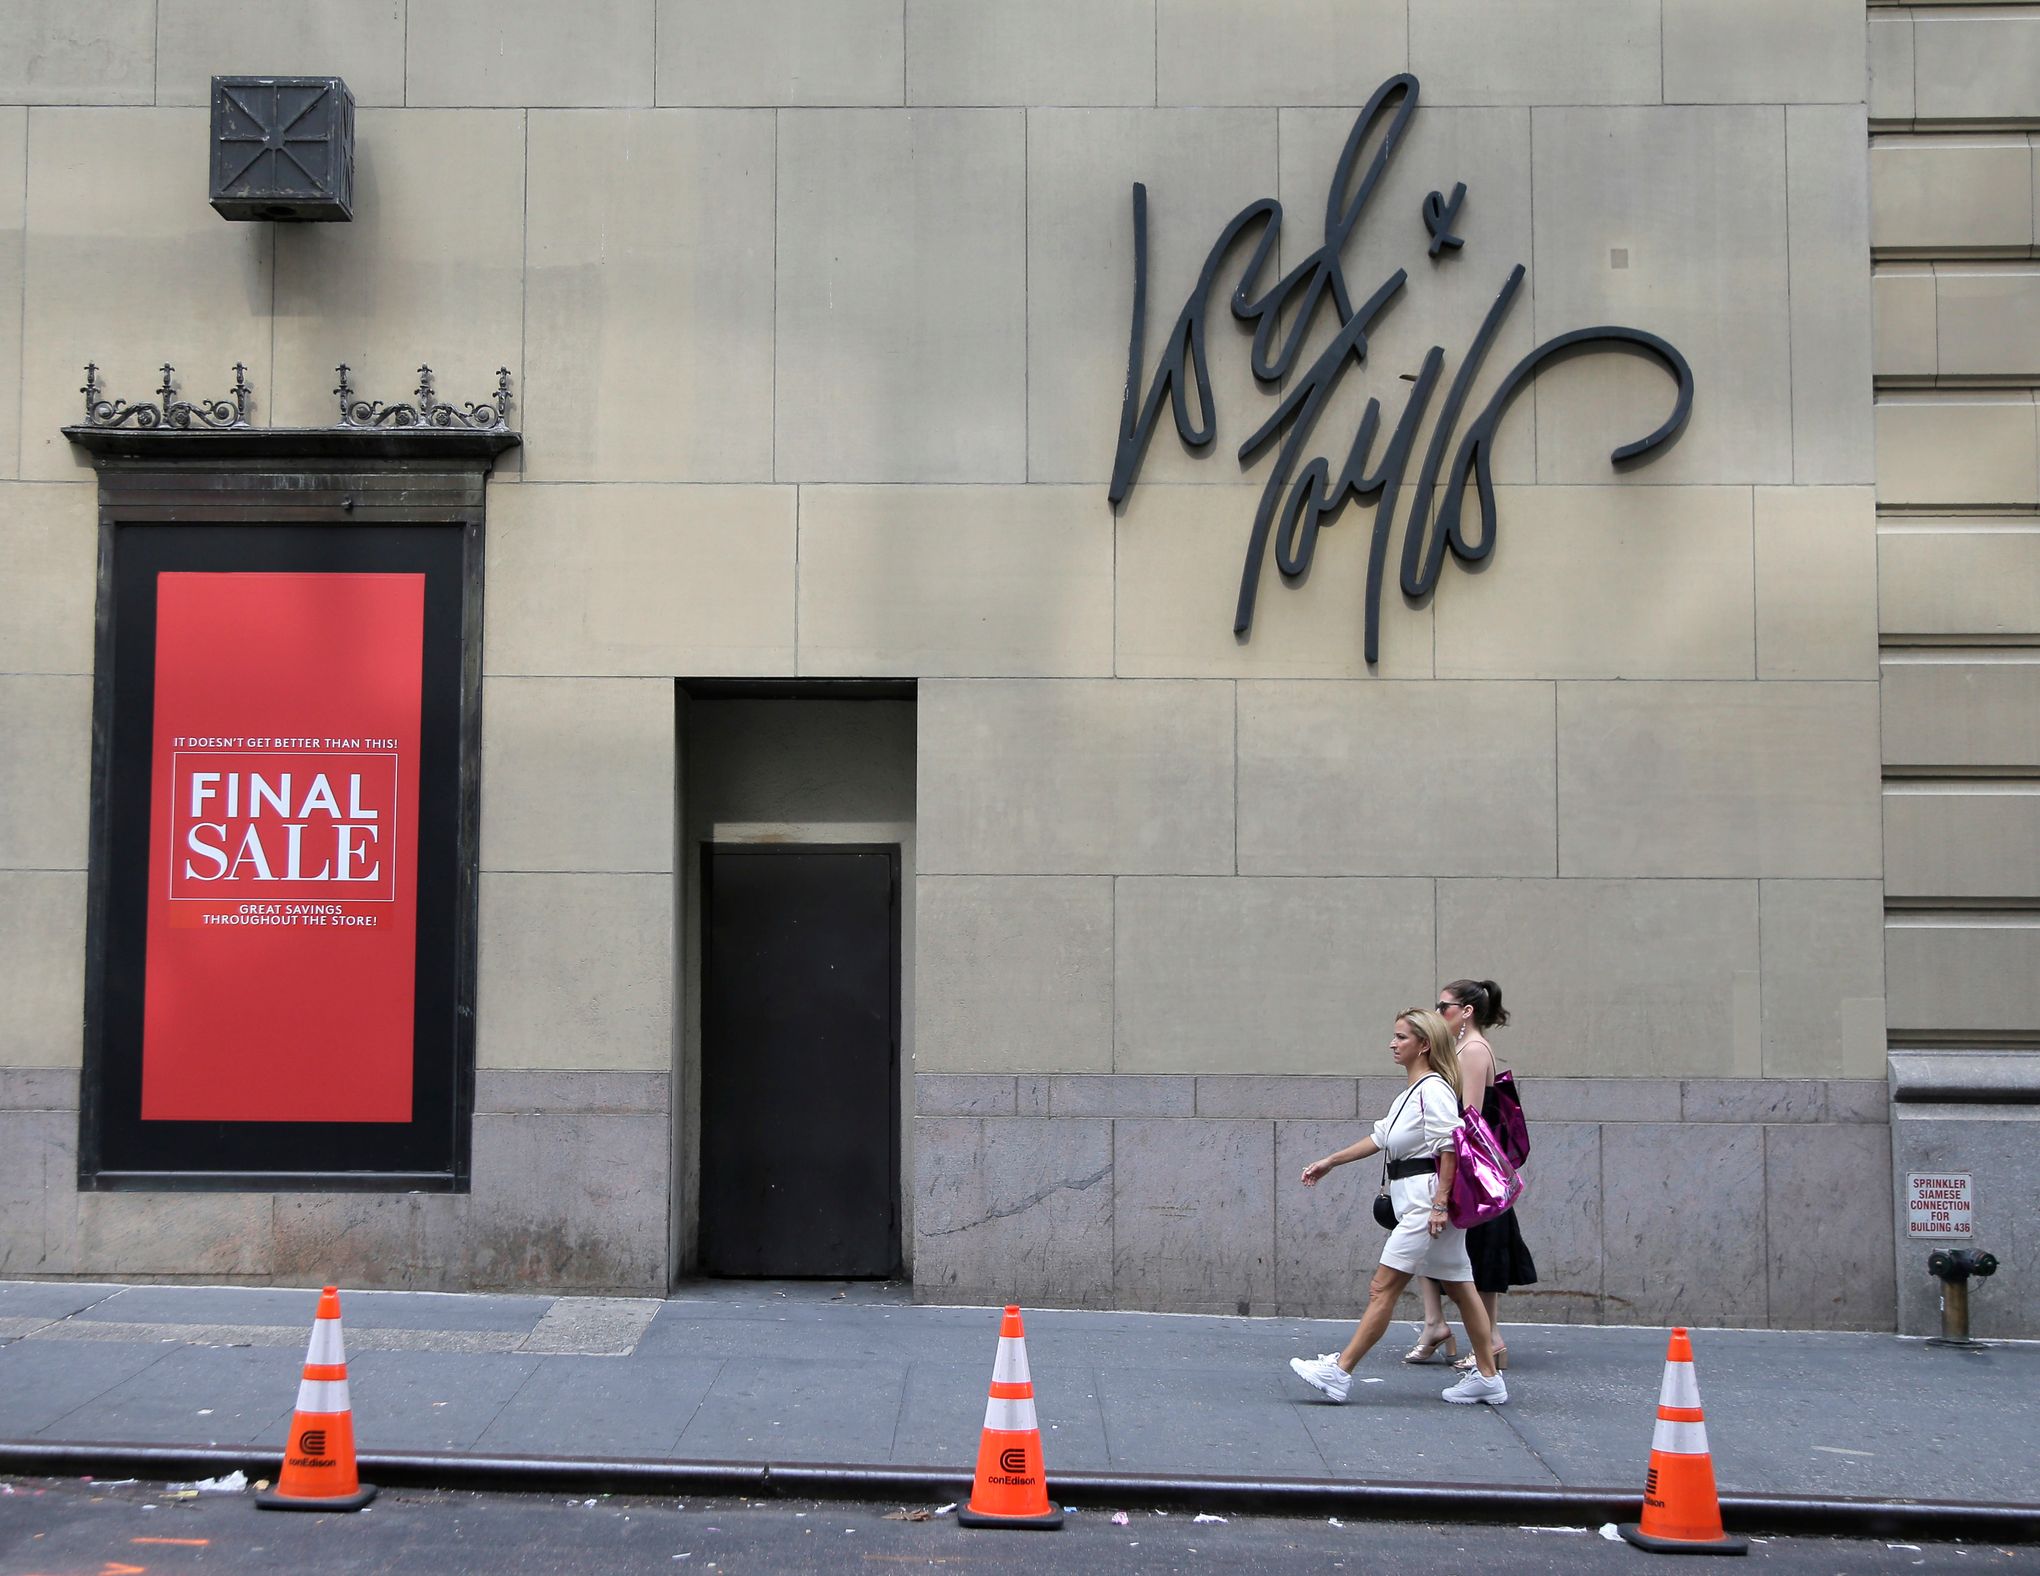 Lord & Taylor Will Be Sold to Le Tote, a Clothing Rental Start-Up